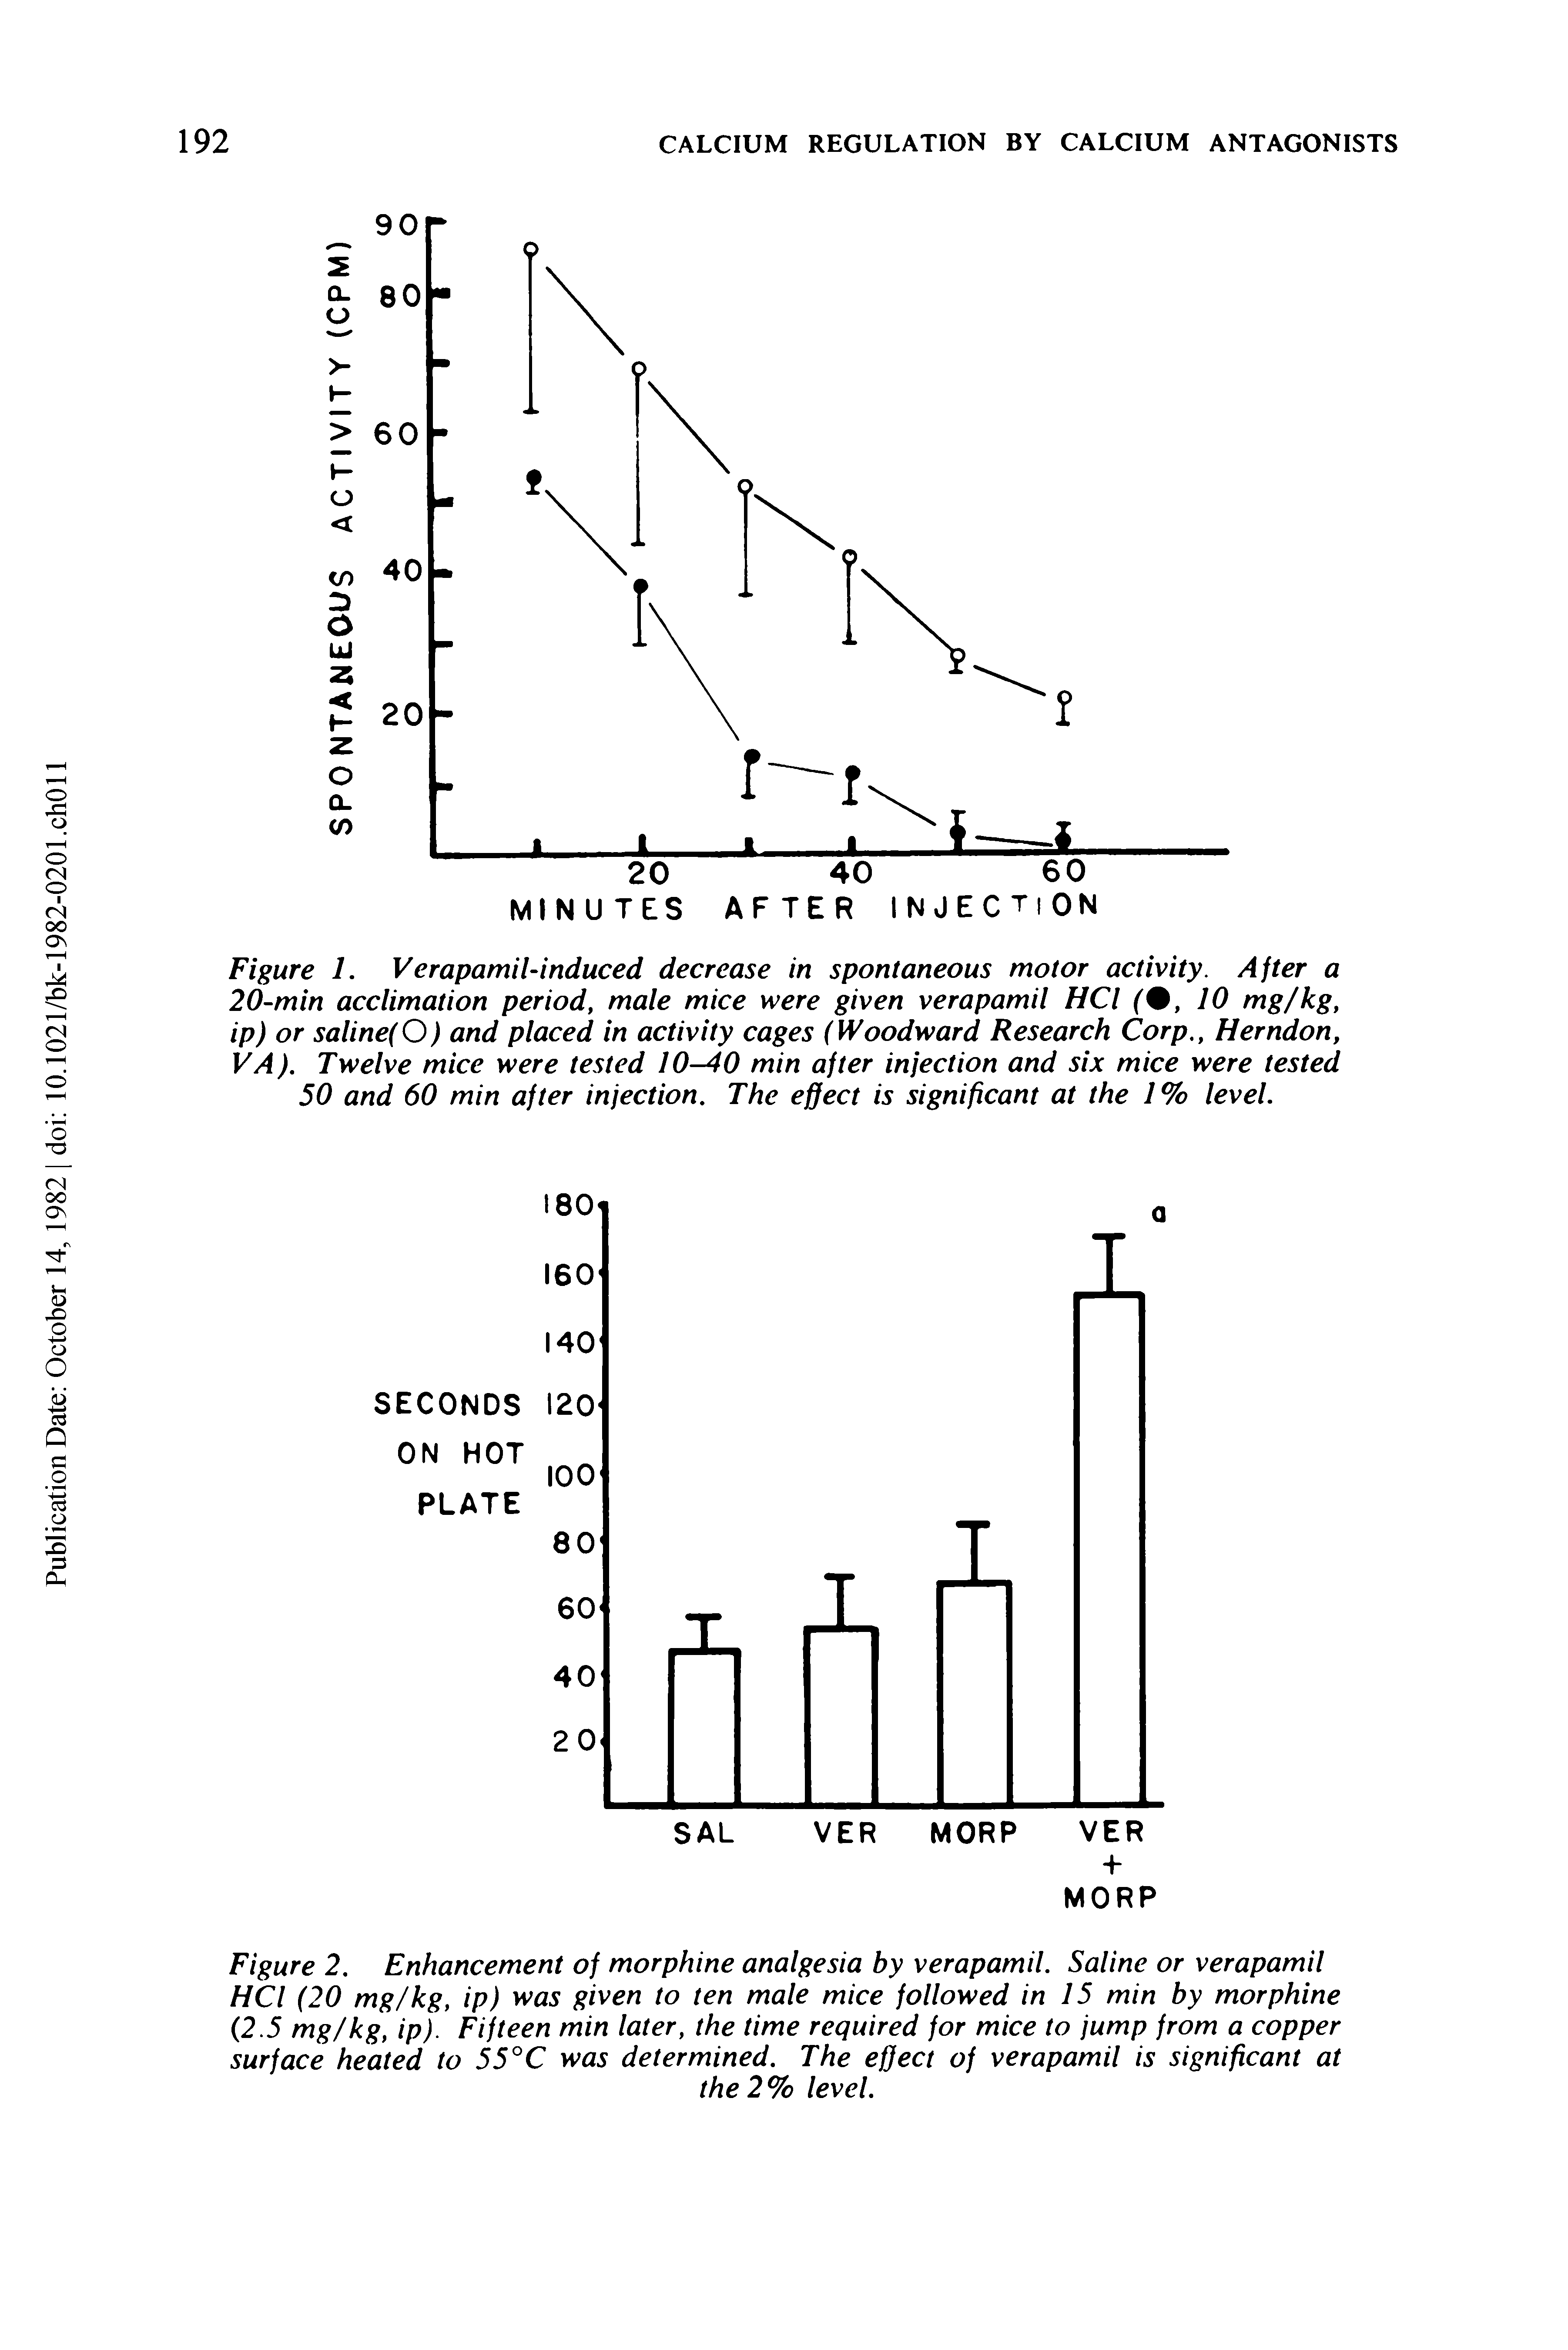 Figure 1. Verapamil-induced decrease in spontaneous motor activity. After a 20-min acclimation period, male mice were given verapamil HCl (0, 10 mg/kg, ip) or saline(O) and placed in activity cages (Woodward Research Corp., Herndon, VA). Twelve mice were tested 10-40 min after injection and six mice were tested 50 and 60 min after injection. The effect is significant at the 1% level.